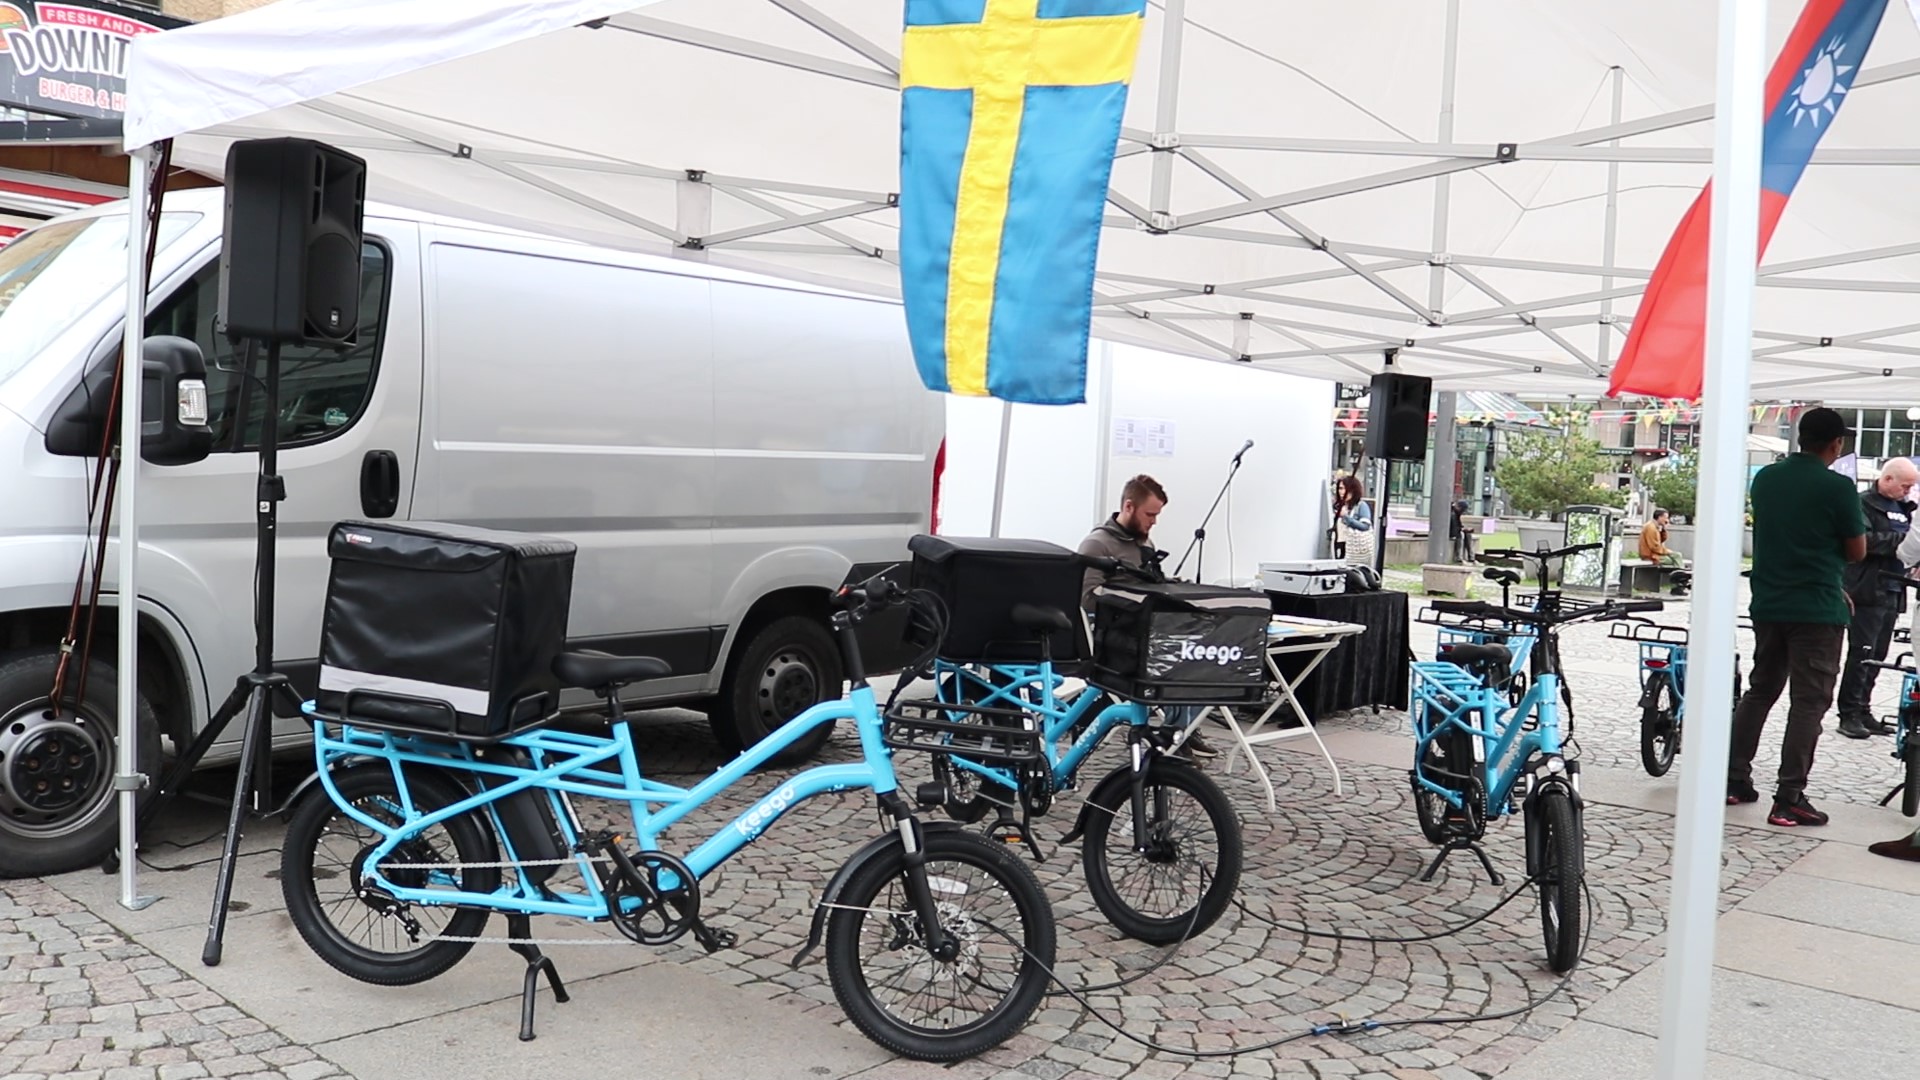 Hop on, let’s ride! Keego Delivery Ebike KG4 First Test Riding Event in Sweden - Keego Mobility